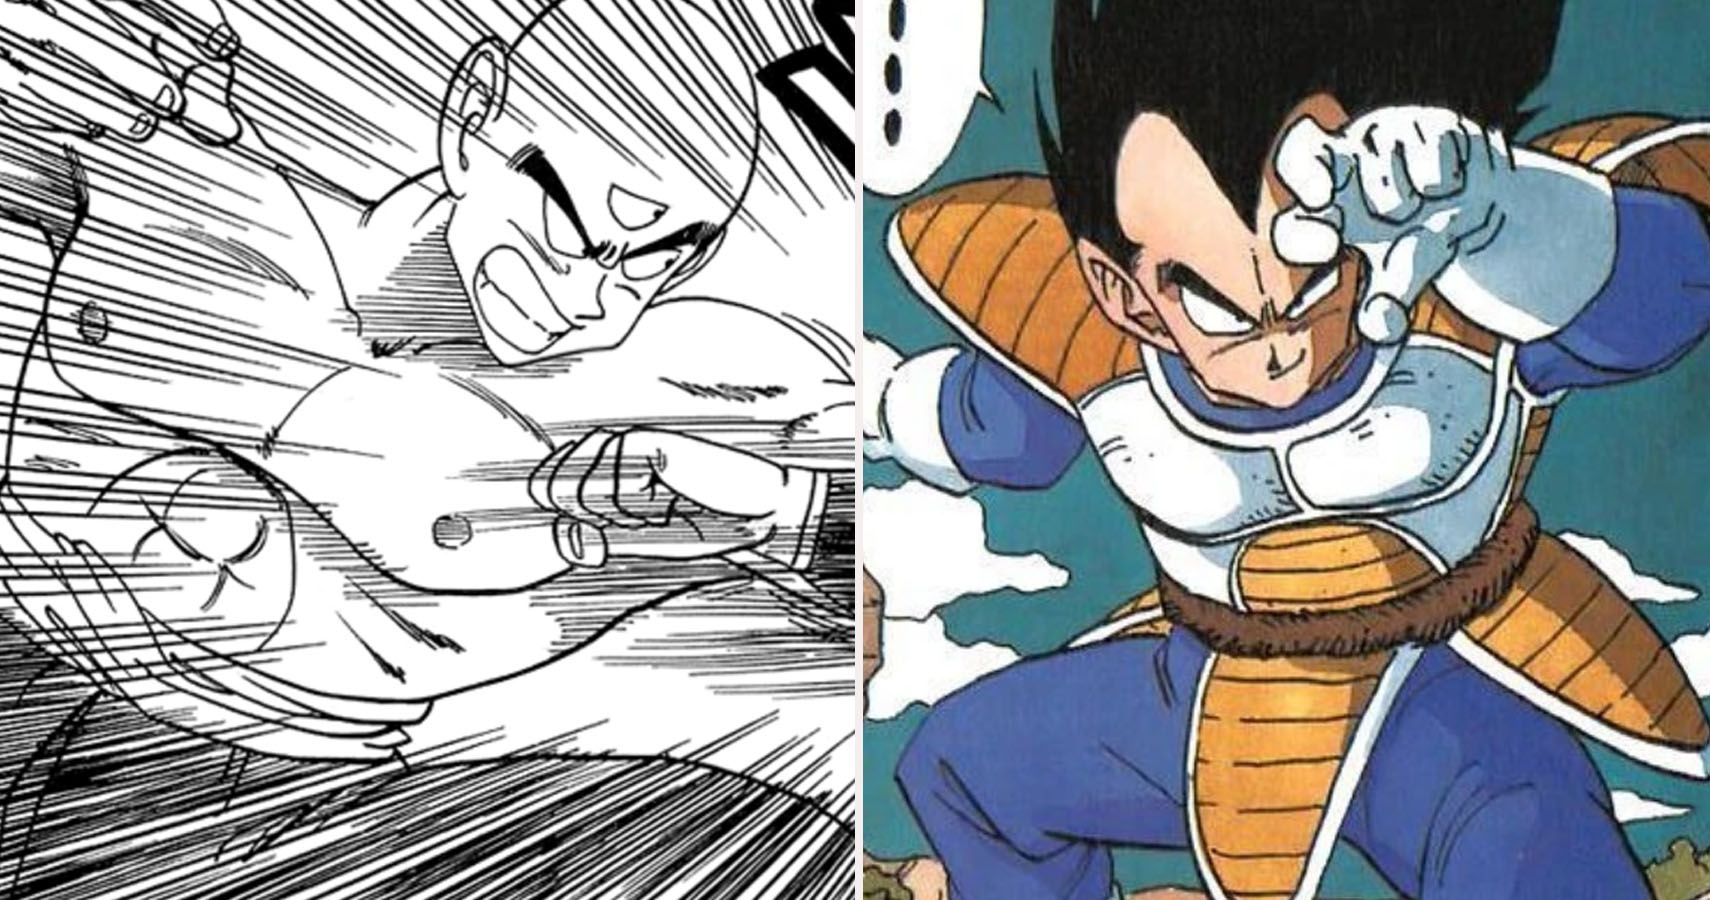 Dragon Ball: Every Character Who Defeated Goku In The Original Series